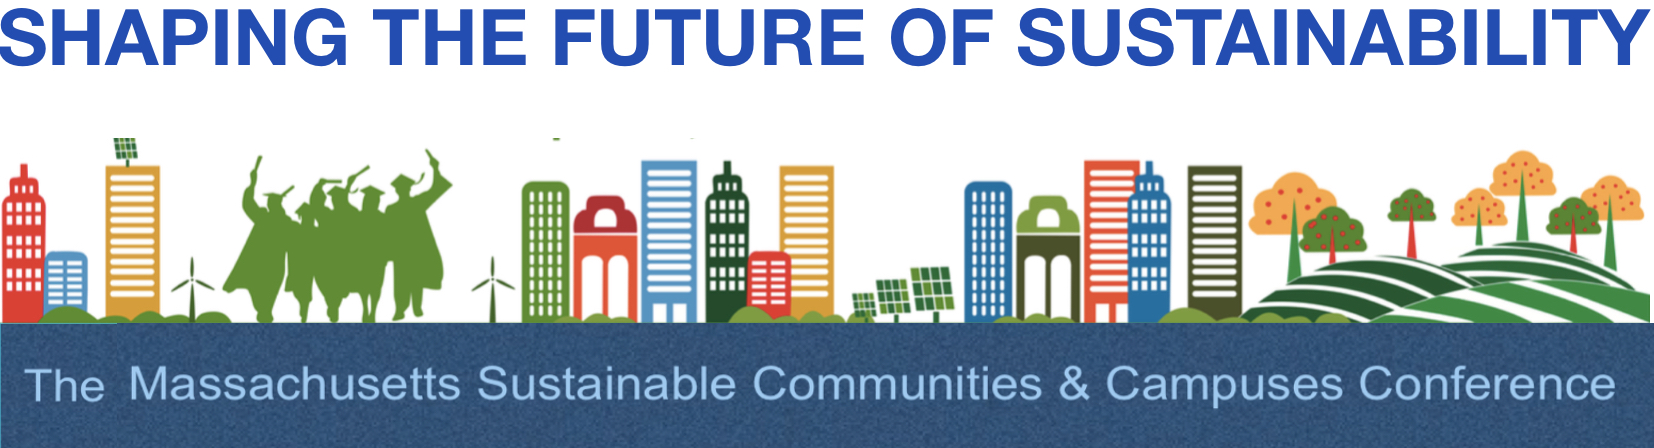 MA Sustainable Communities & Campuses | Environmental Sustainability Conference